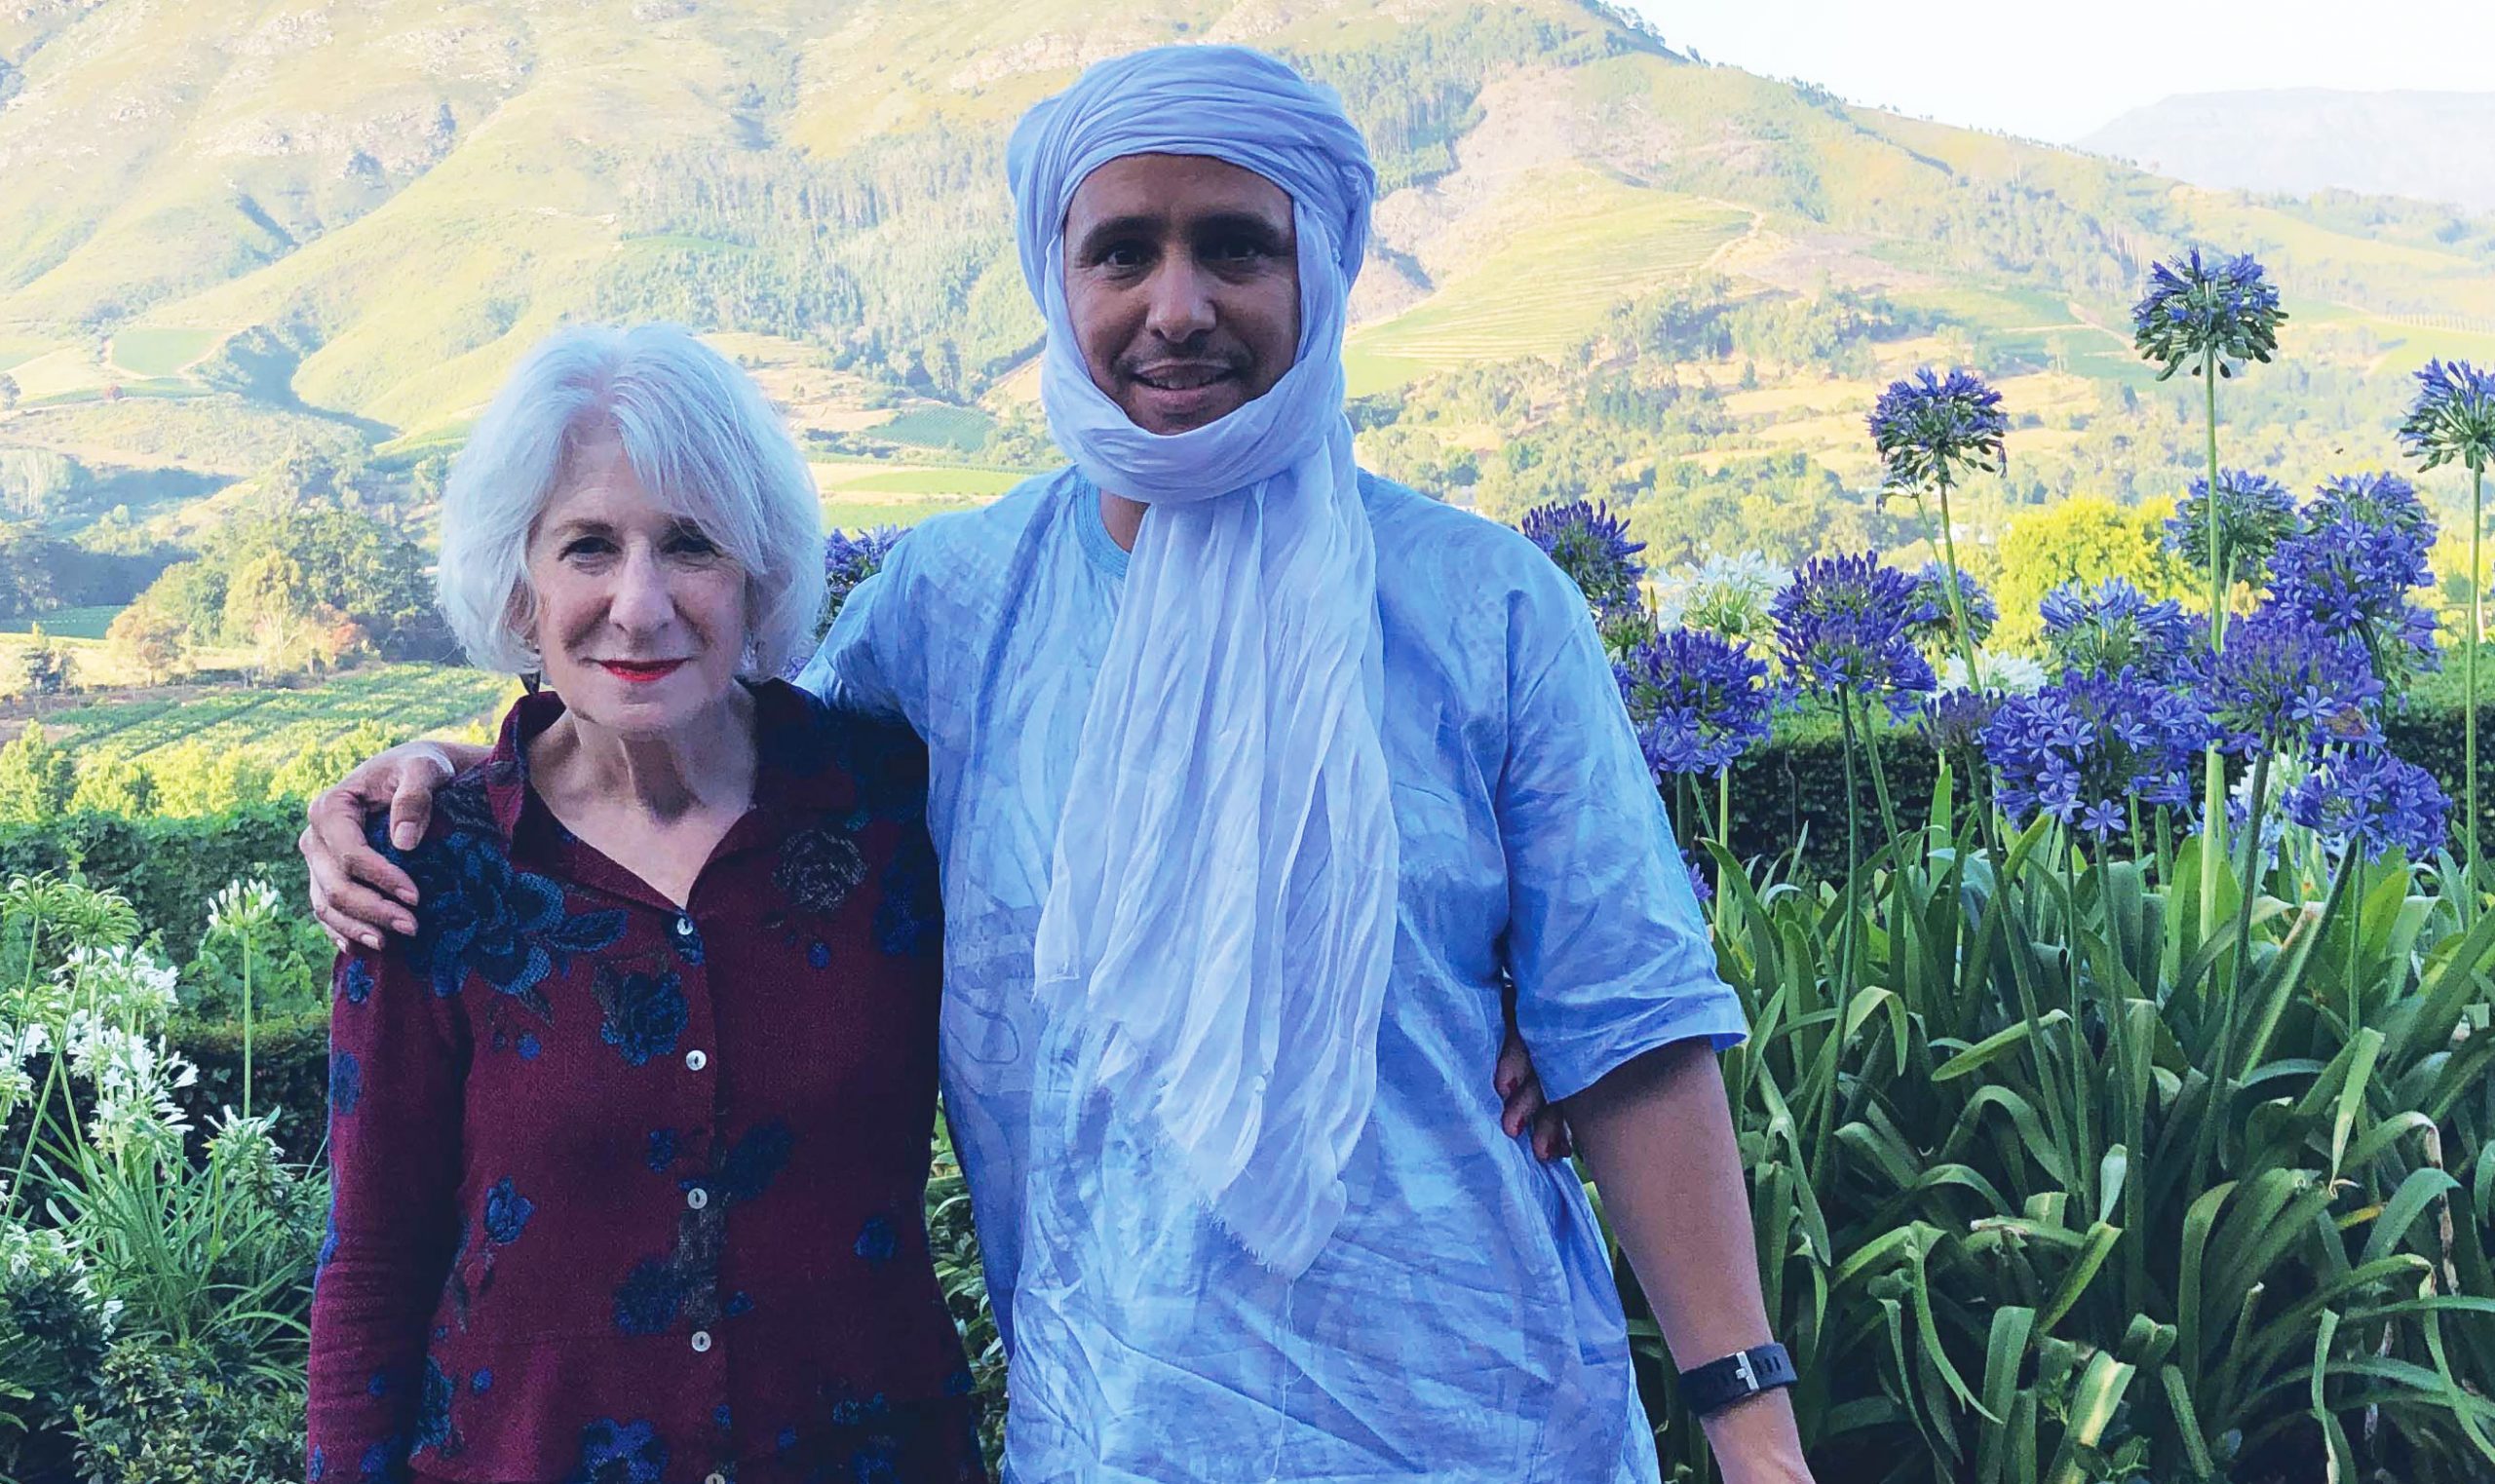 Nancy Hollander with Mohamedou Salahi outdoors in a lush, green environment